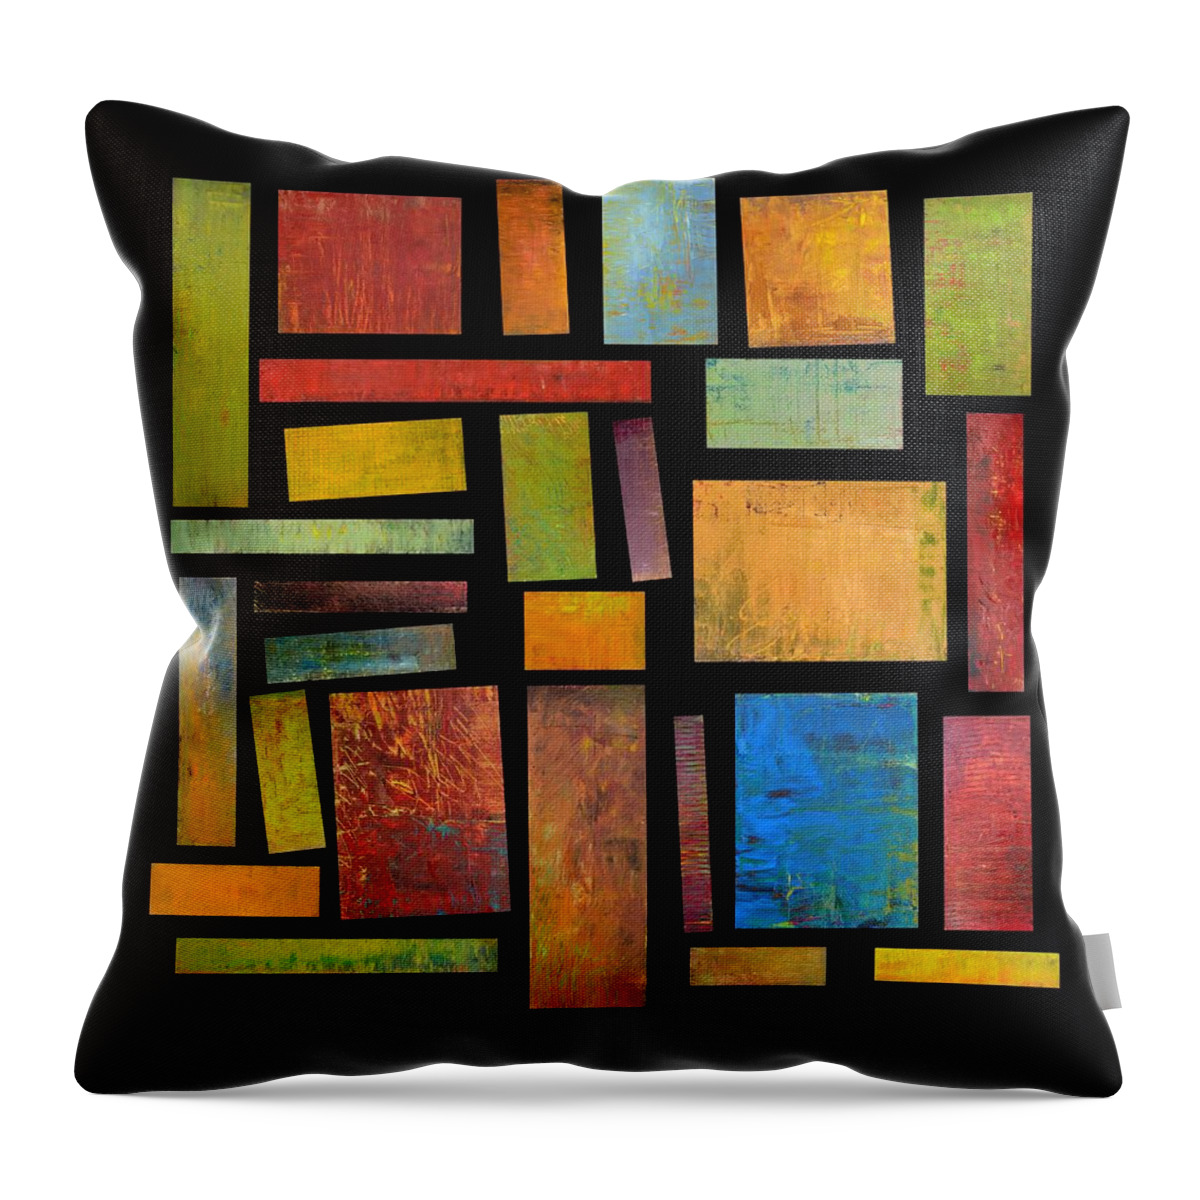 Textural Throw Pillow featuring the painting Building Blocks Three by Michelle Calkins